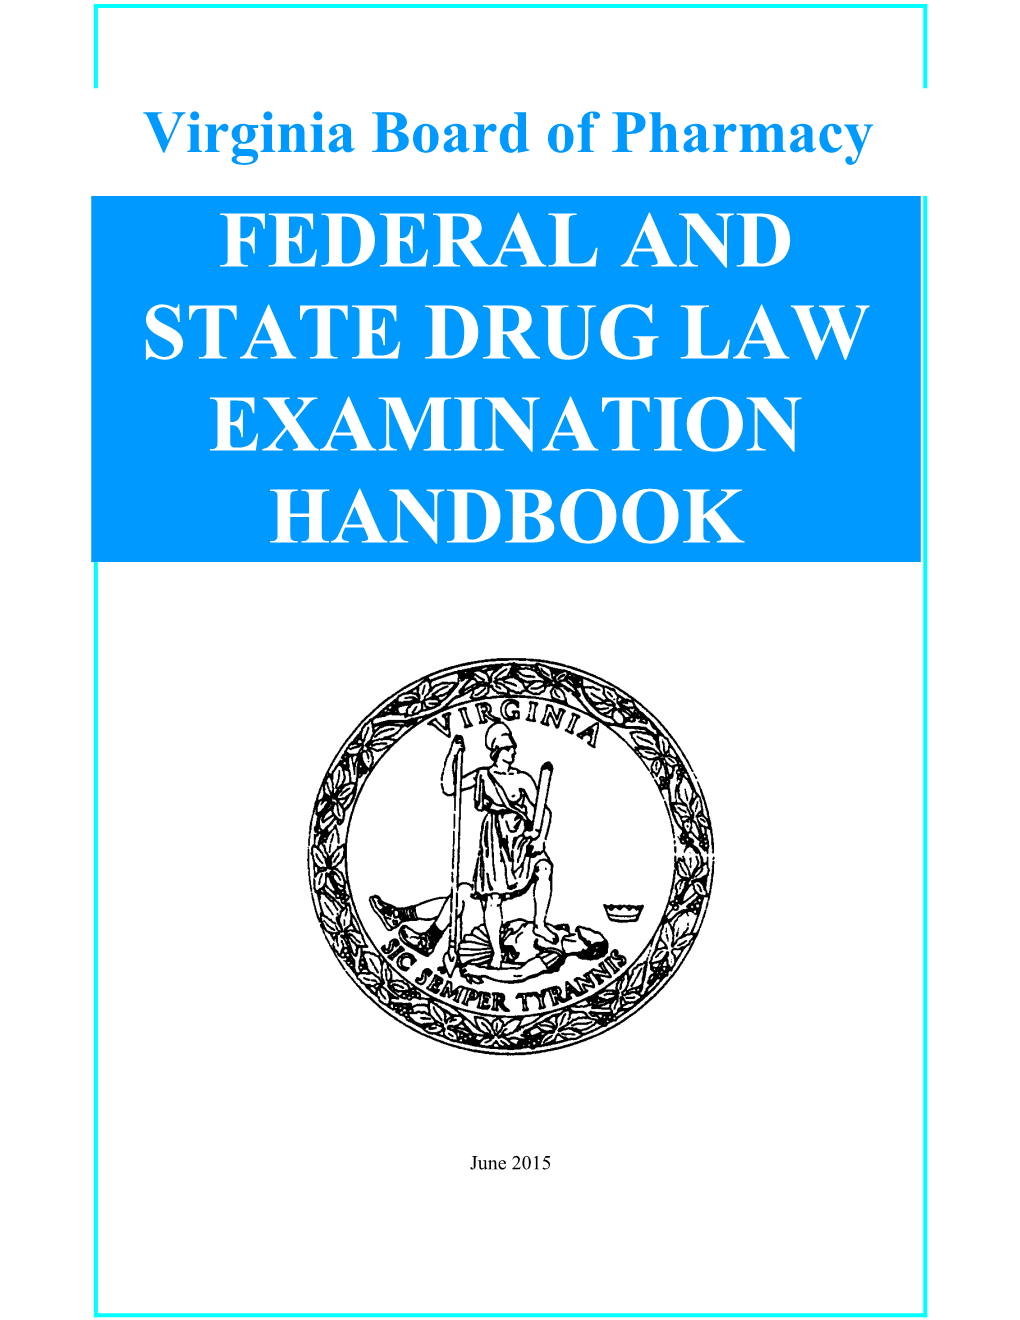 Tudy Guide (Examination Handbook) for Virginia Federal and State Drug Law Exam